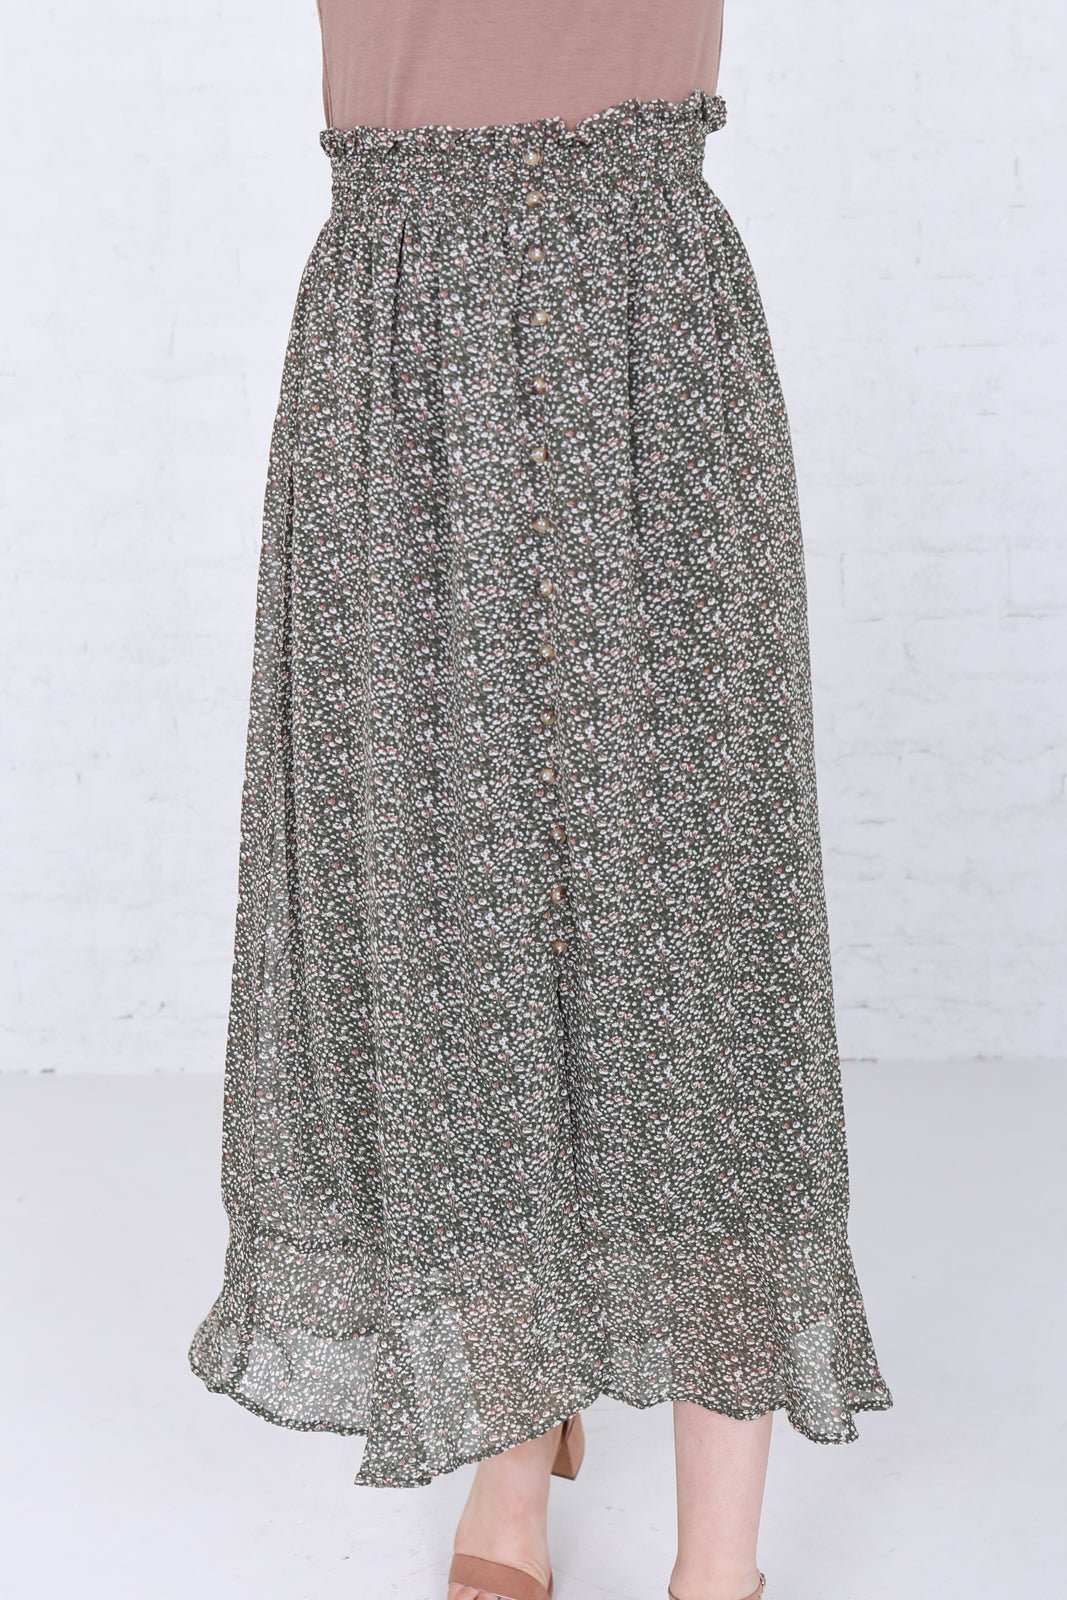 Maxi Button Front Skirt in Four Leaf Clover  Ivy and Pearl Boutique   